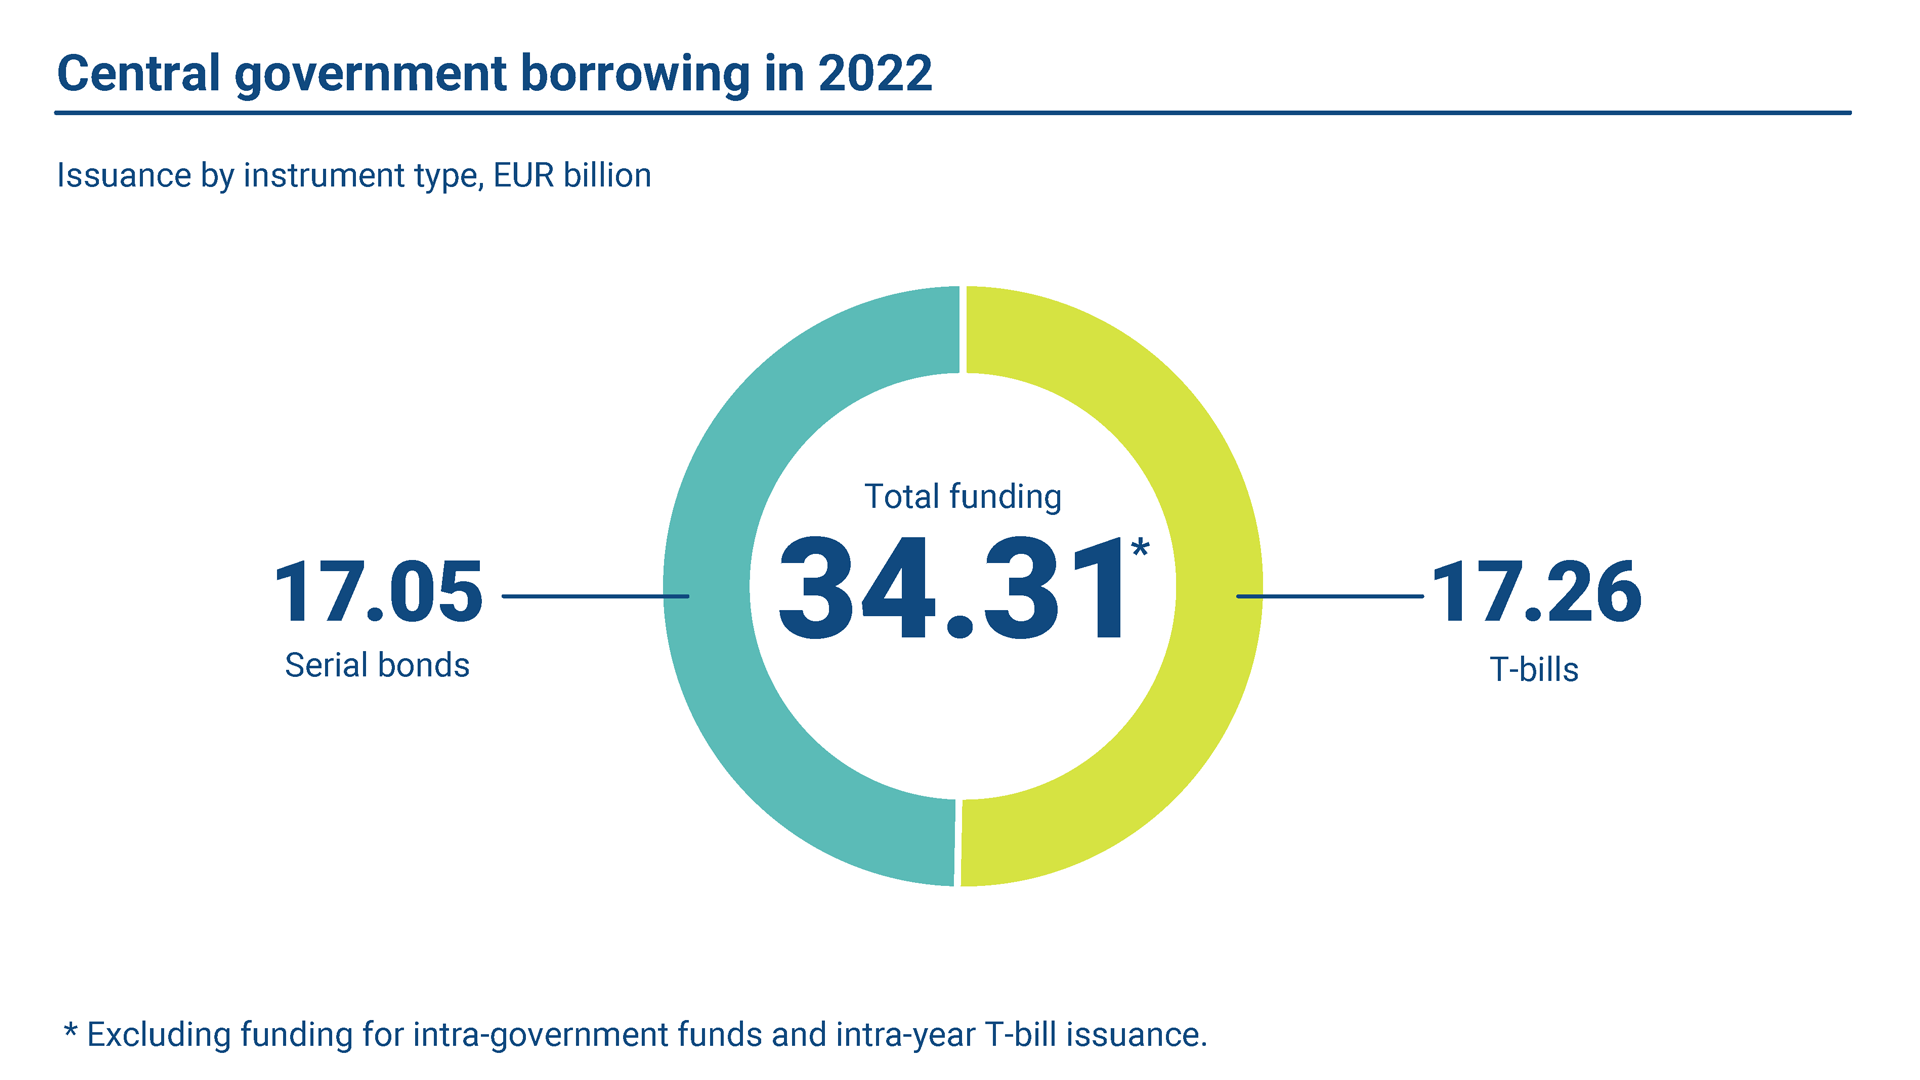 The realised gross borrowing amount in 2022 was EUR 34.31 billion. Of this amount, long-term issuance accounted for EUR 17.05 billion and short-term borrowing for EUR 17.26 billion. 